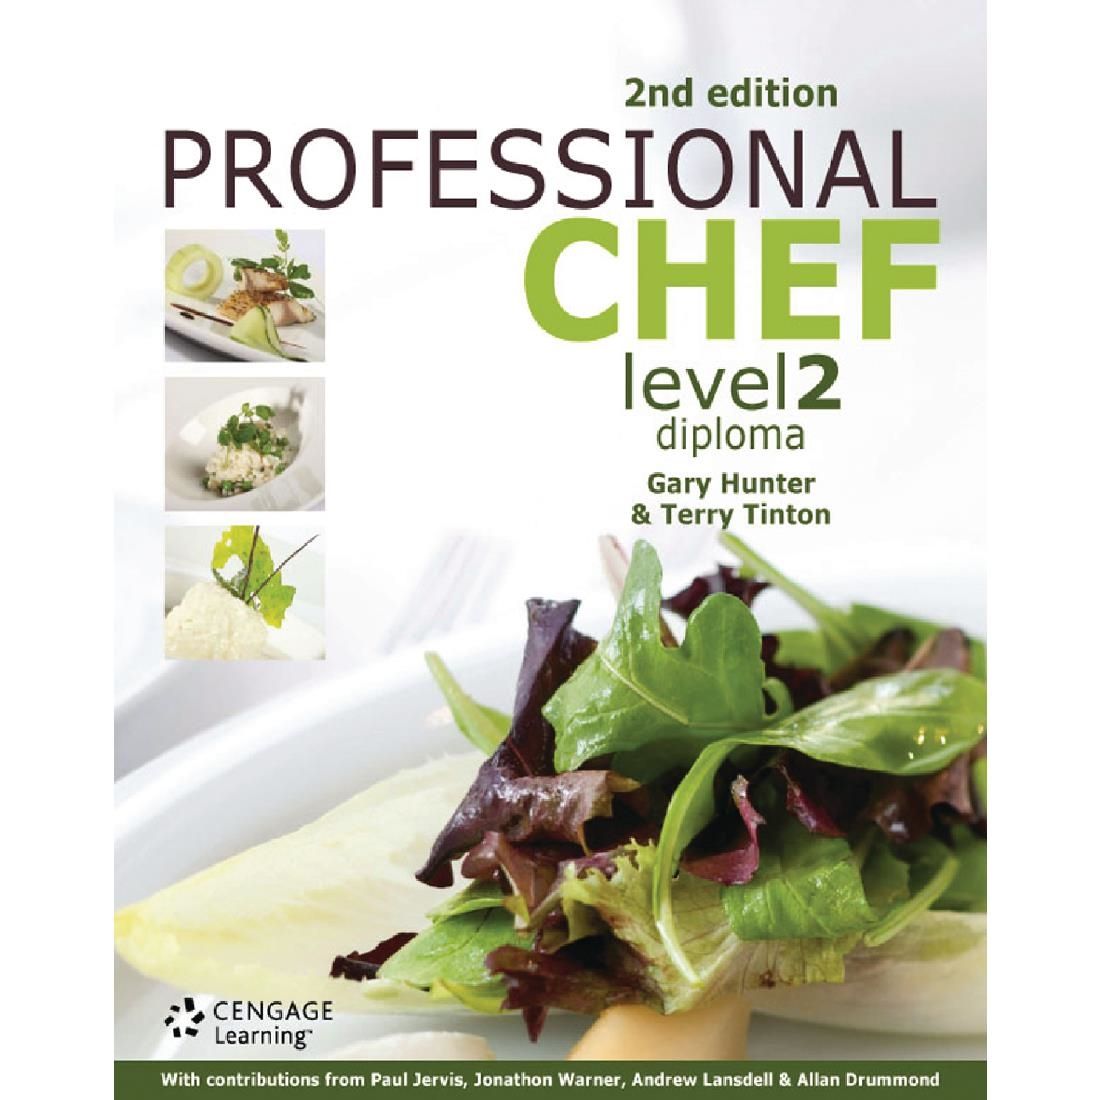 1G0059 Professional Chef Level 2 Diploma - 2nd edition JD Catering Equipment Solutions Ltd